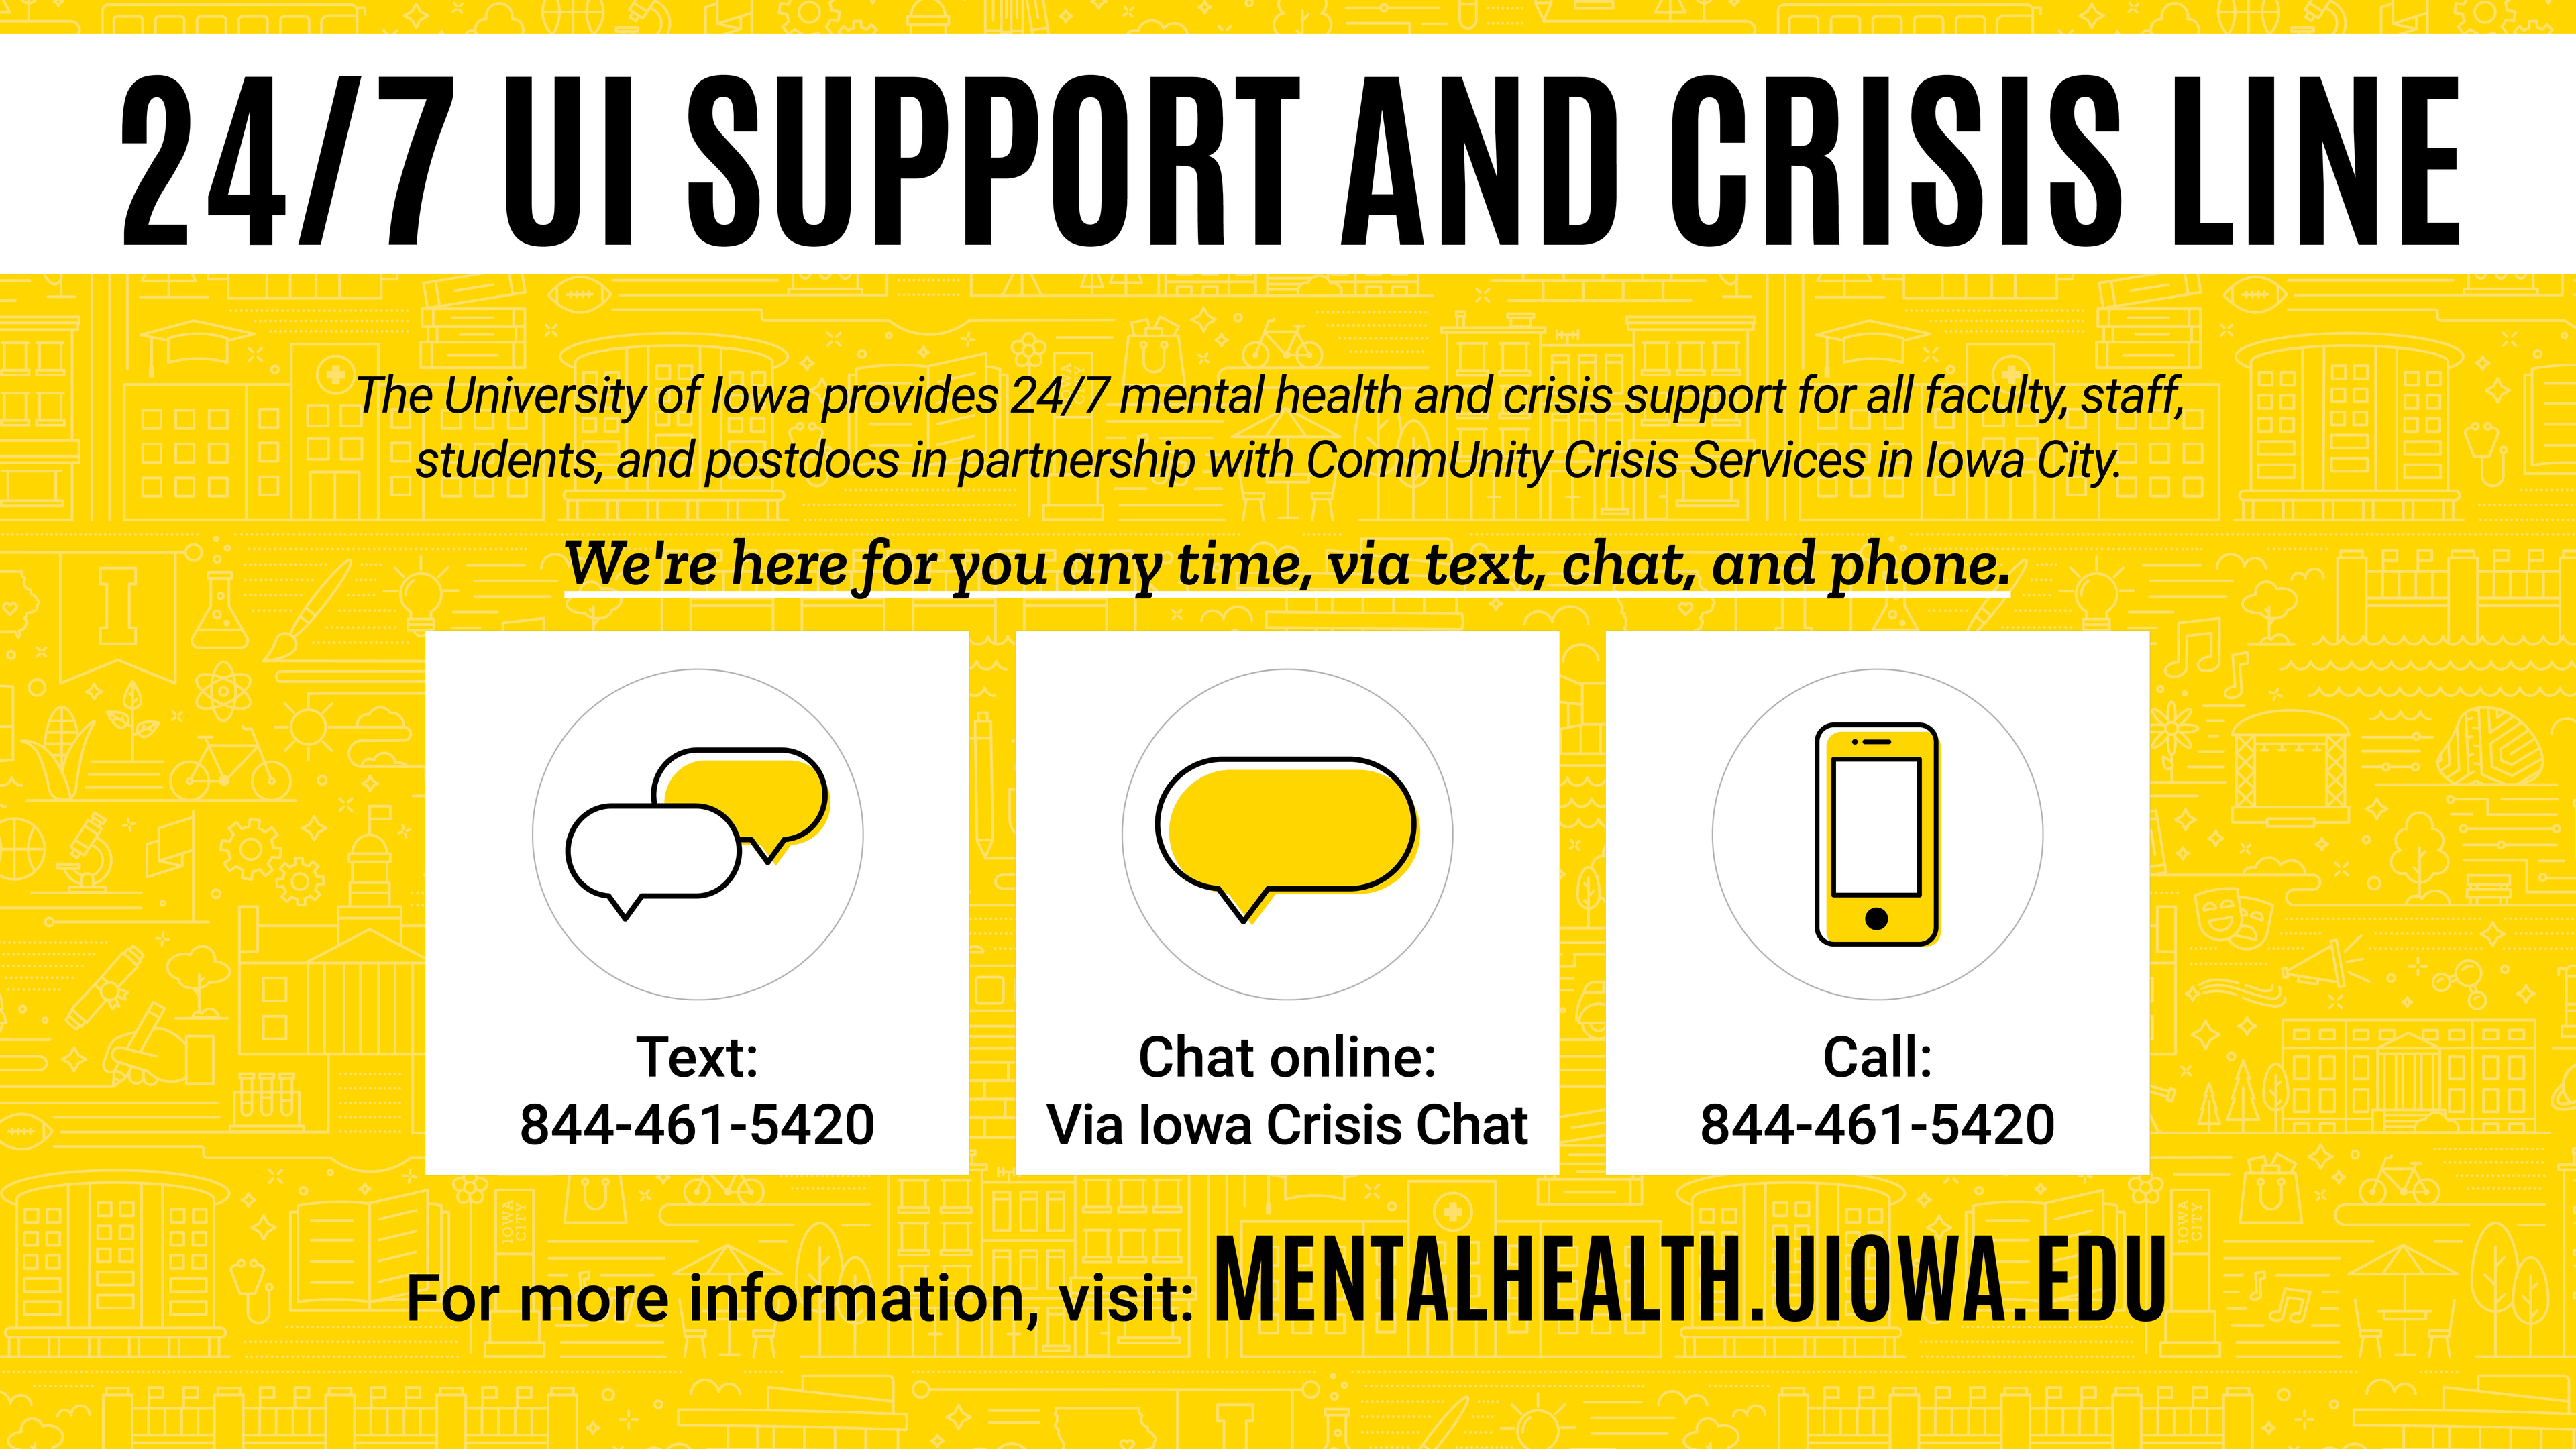 Call the UI Support and Crisis Line at any time. 844-461-5420